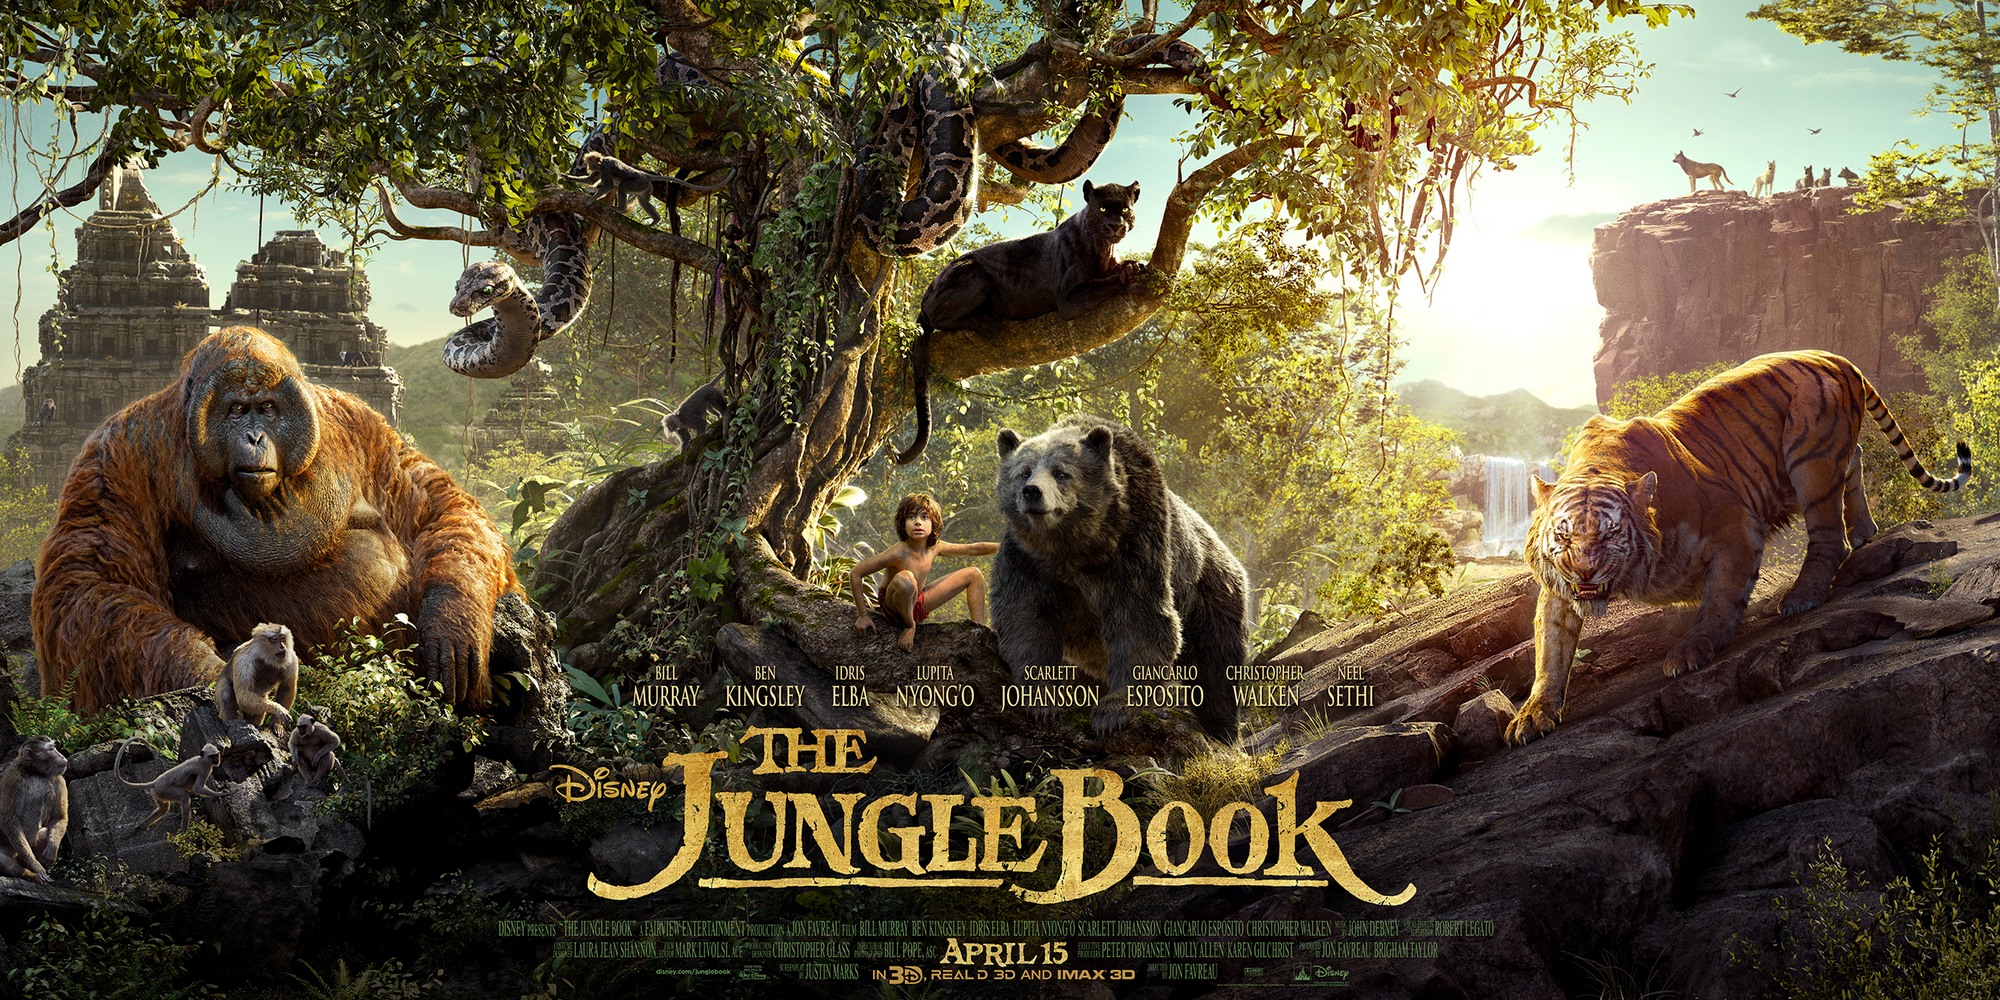 The Jungle Book poster